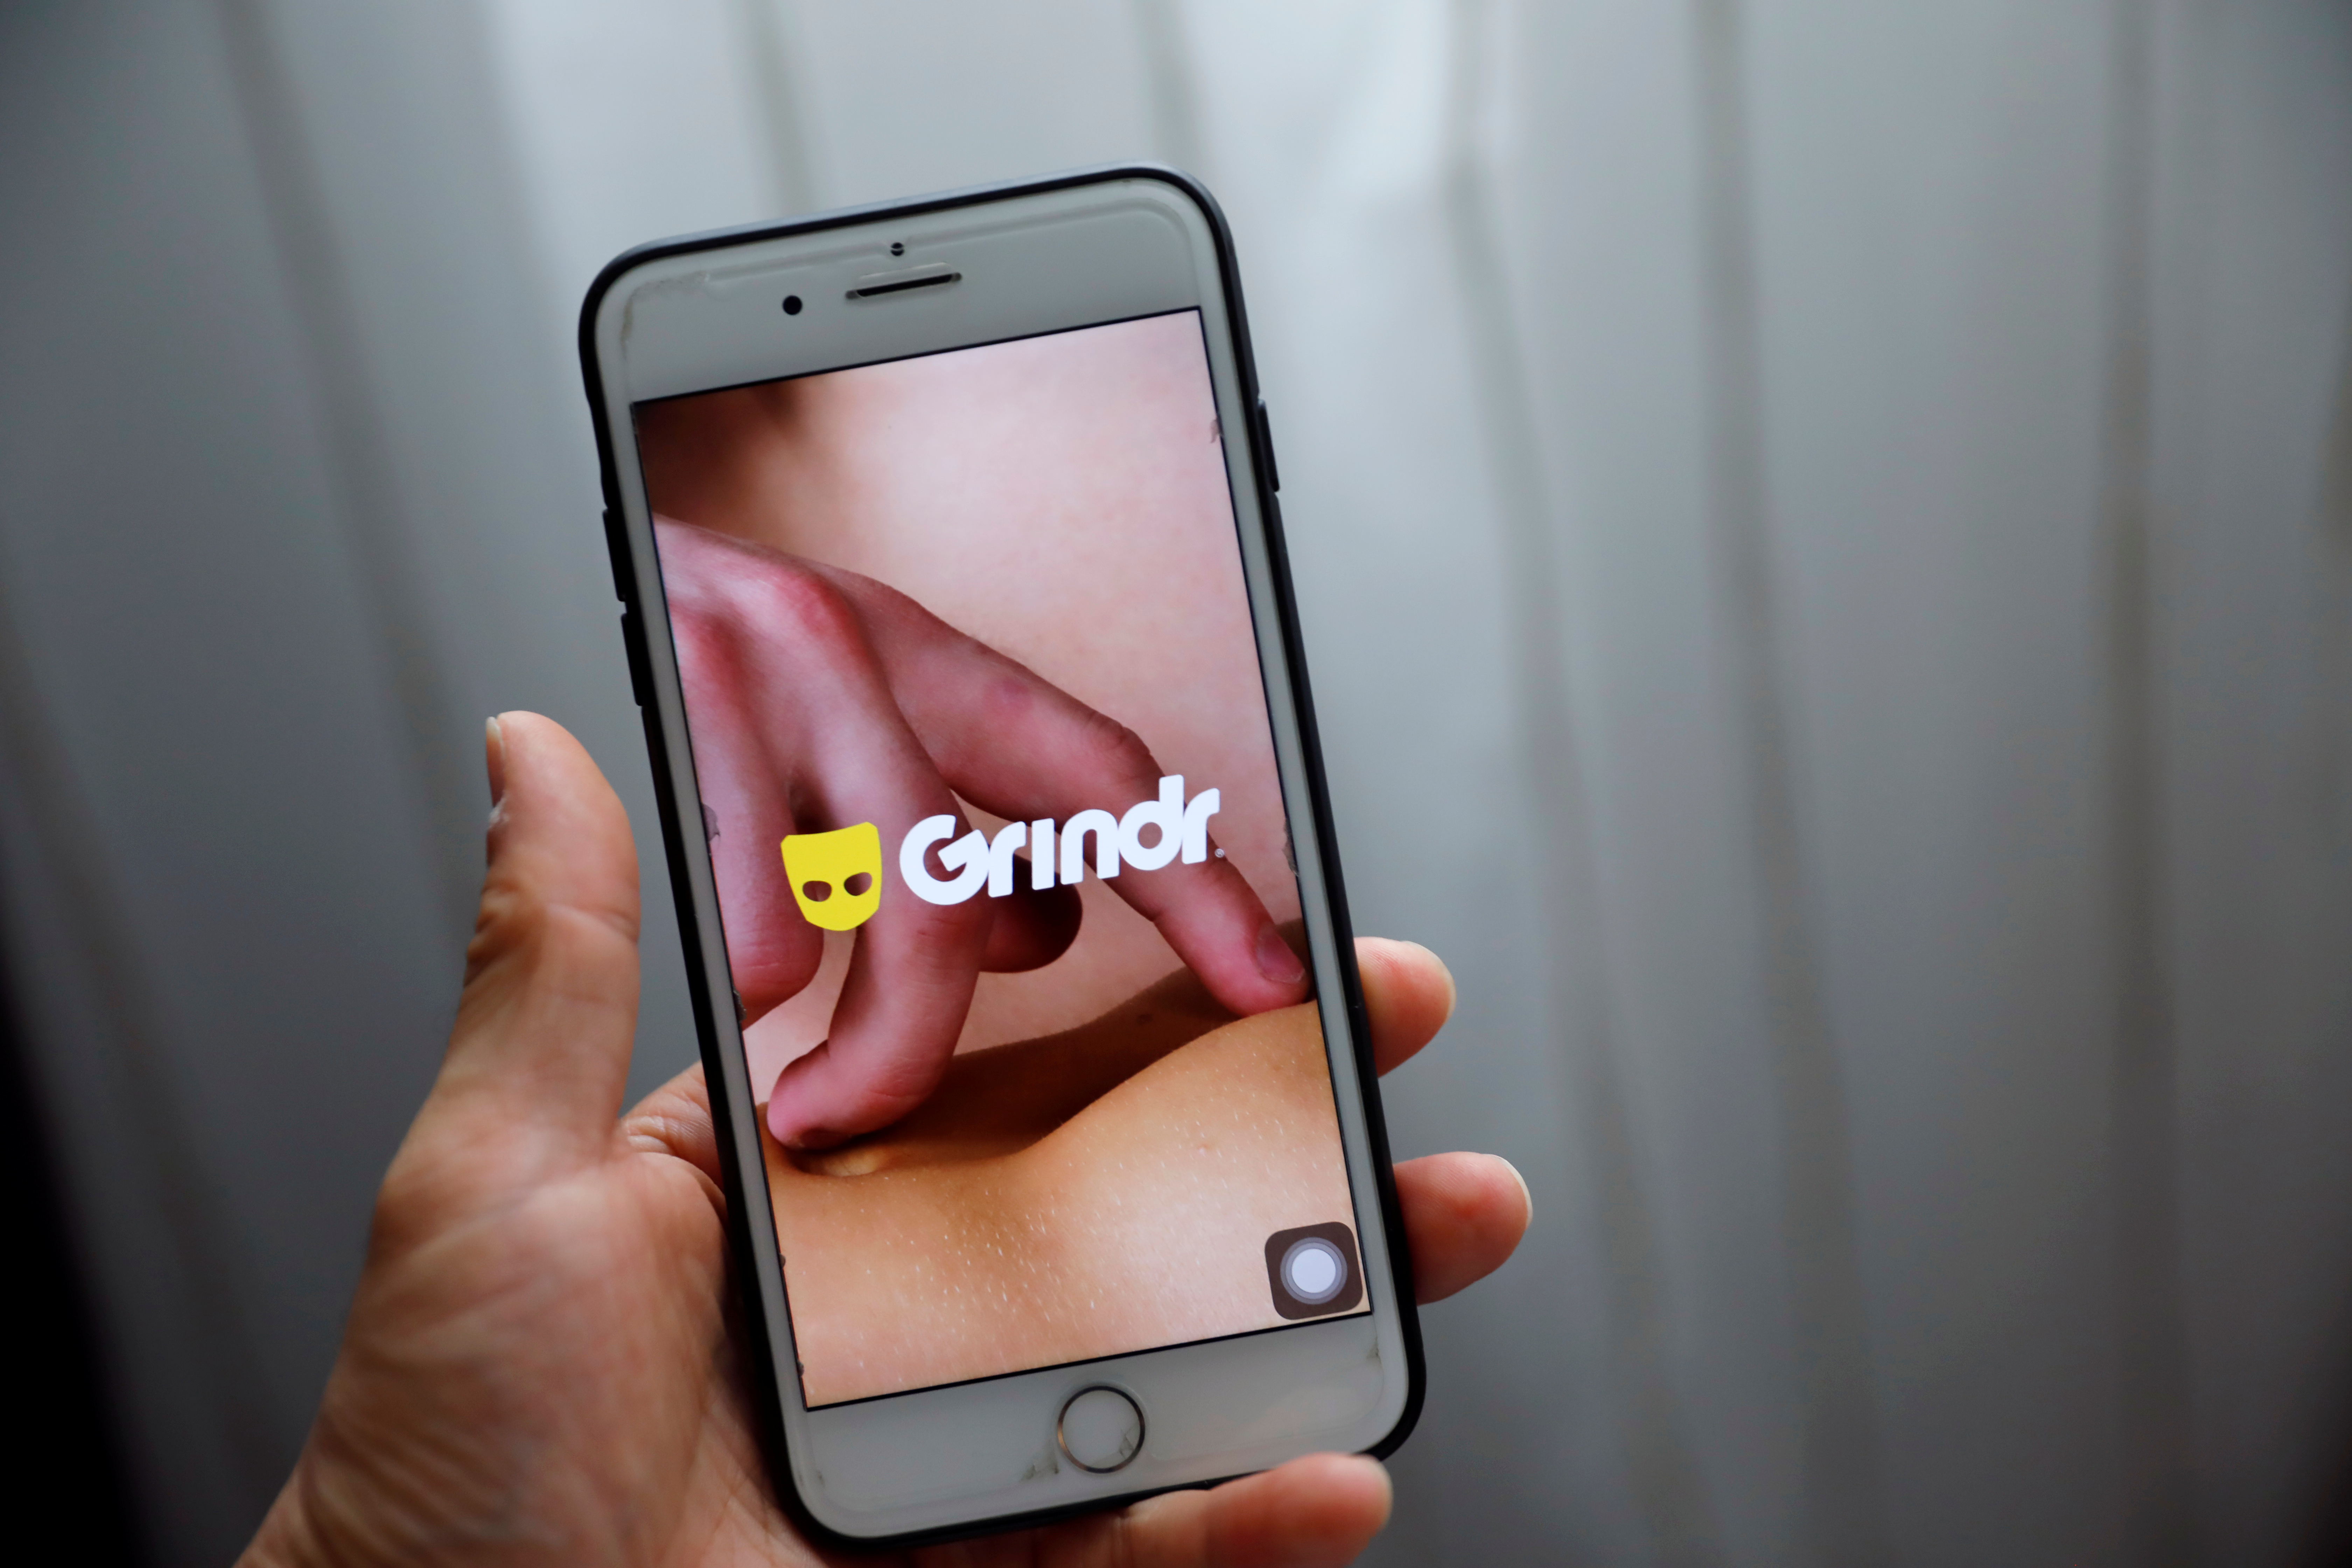 Is it a threat to US security that China owns Grindr, a gay dating app?